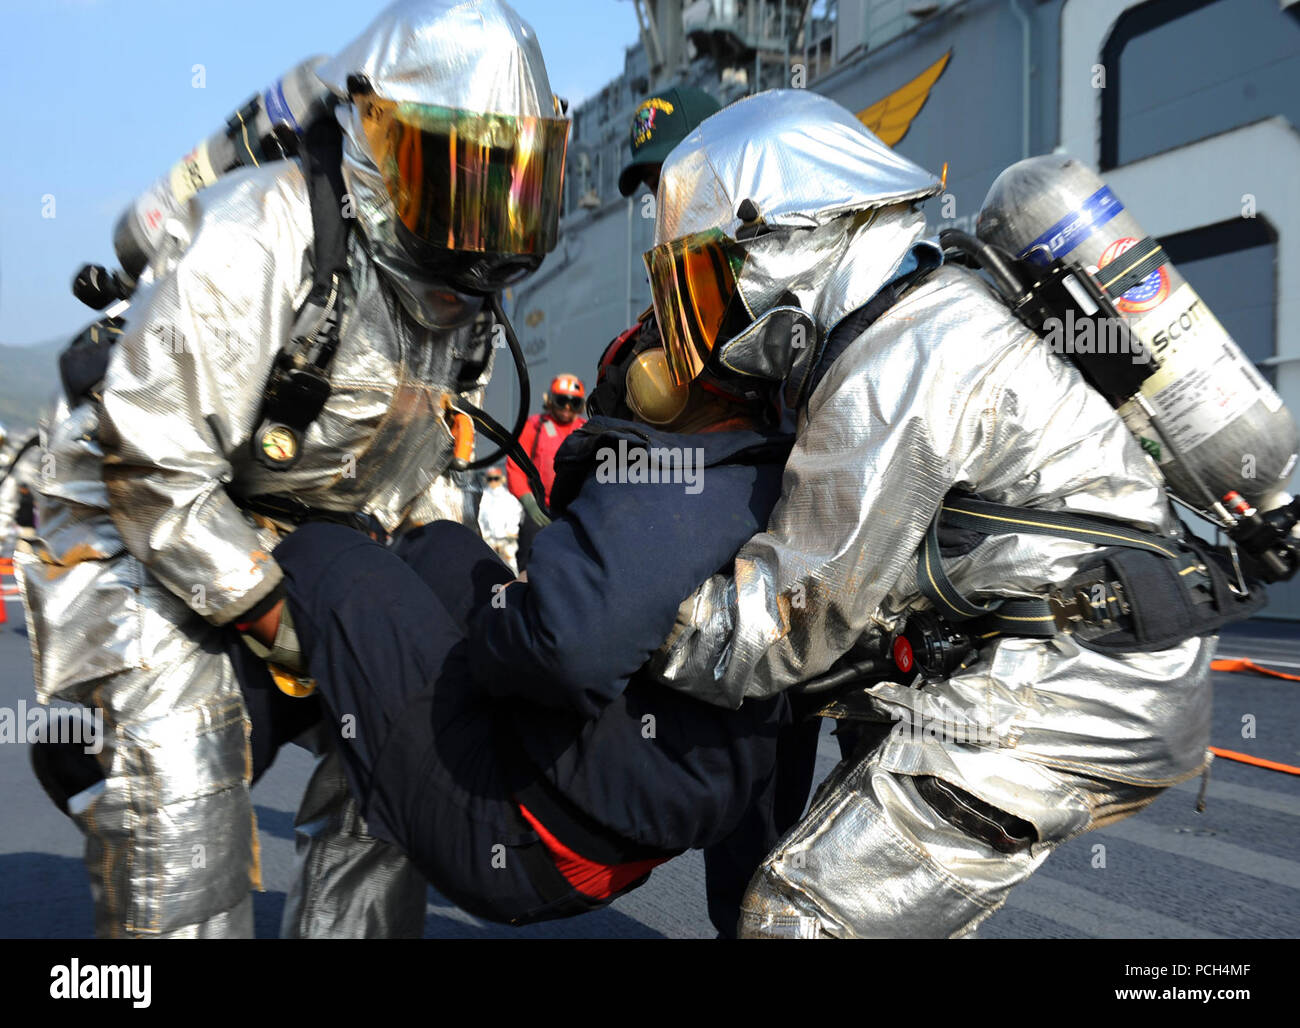 Aviation Boatswain's Mate (Handling) Airman Jovoni West, left, and Aviation Boatswain's Mate (Handling) Airman Gregorio Rangel, members of the crash and salvage team, move a simulated casualty during an aircraft fire drill on the flight deck of the forward-deployed amphibious assault ship USS Bonhomme Richard (LHD 6). Bonhomme Richard is the lead ship of the Bonhomme Richard Amphibious Ready Group. Stock Photo